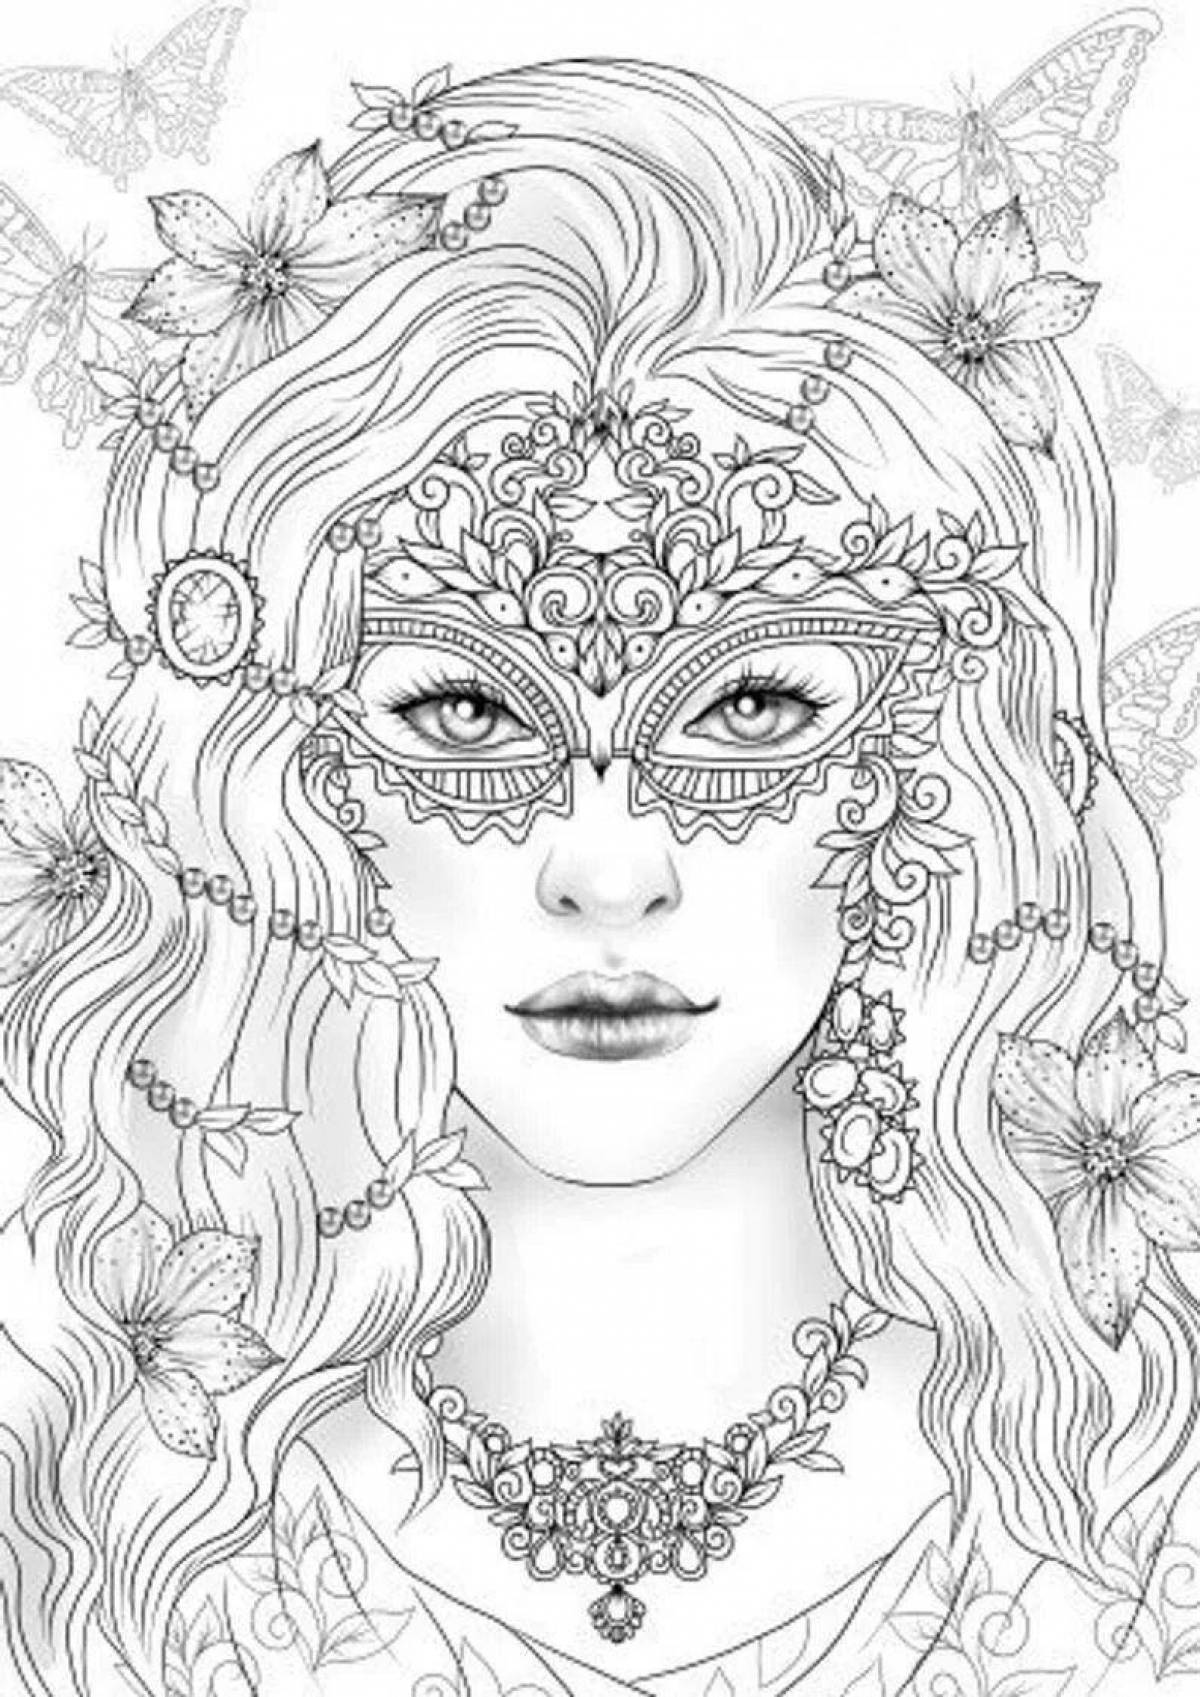 Peaceful anti-stress coloring for women